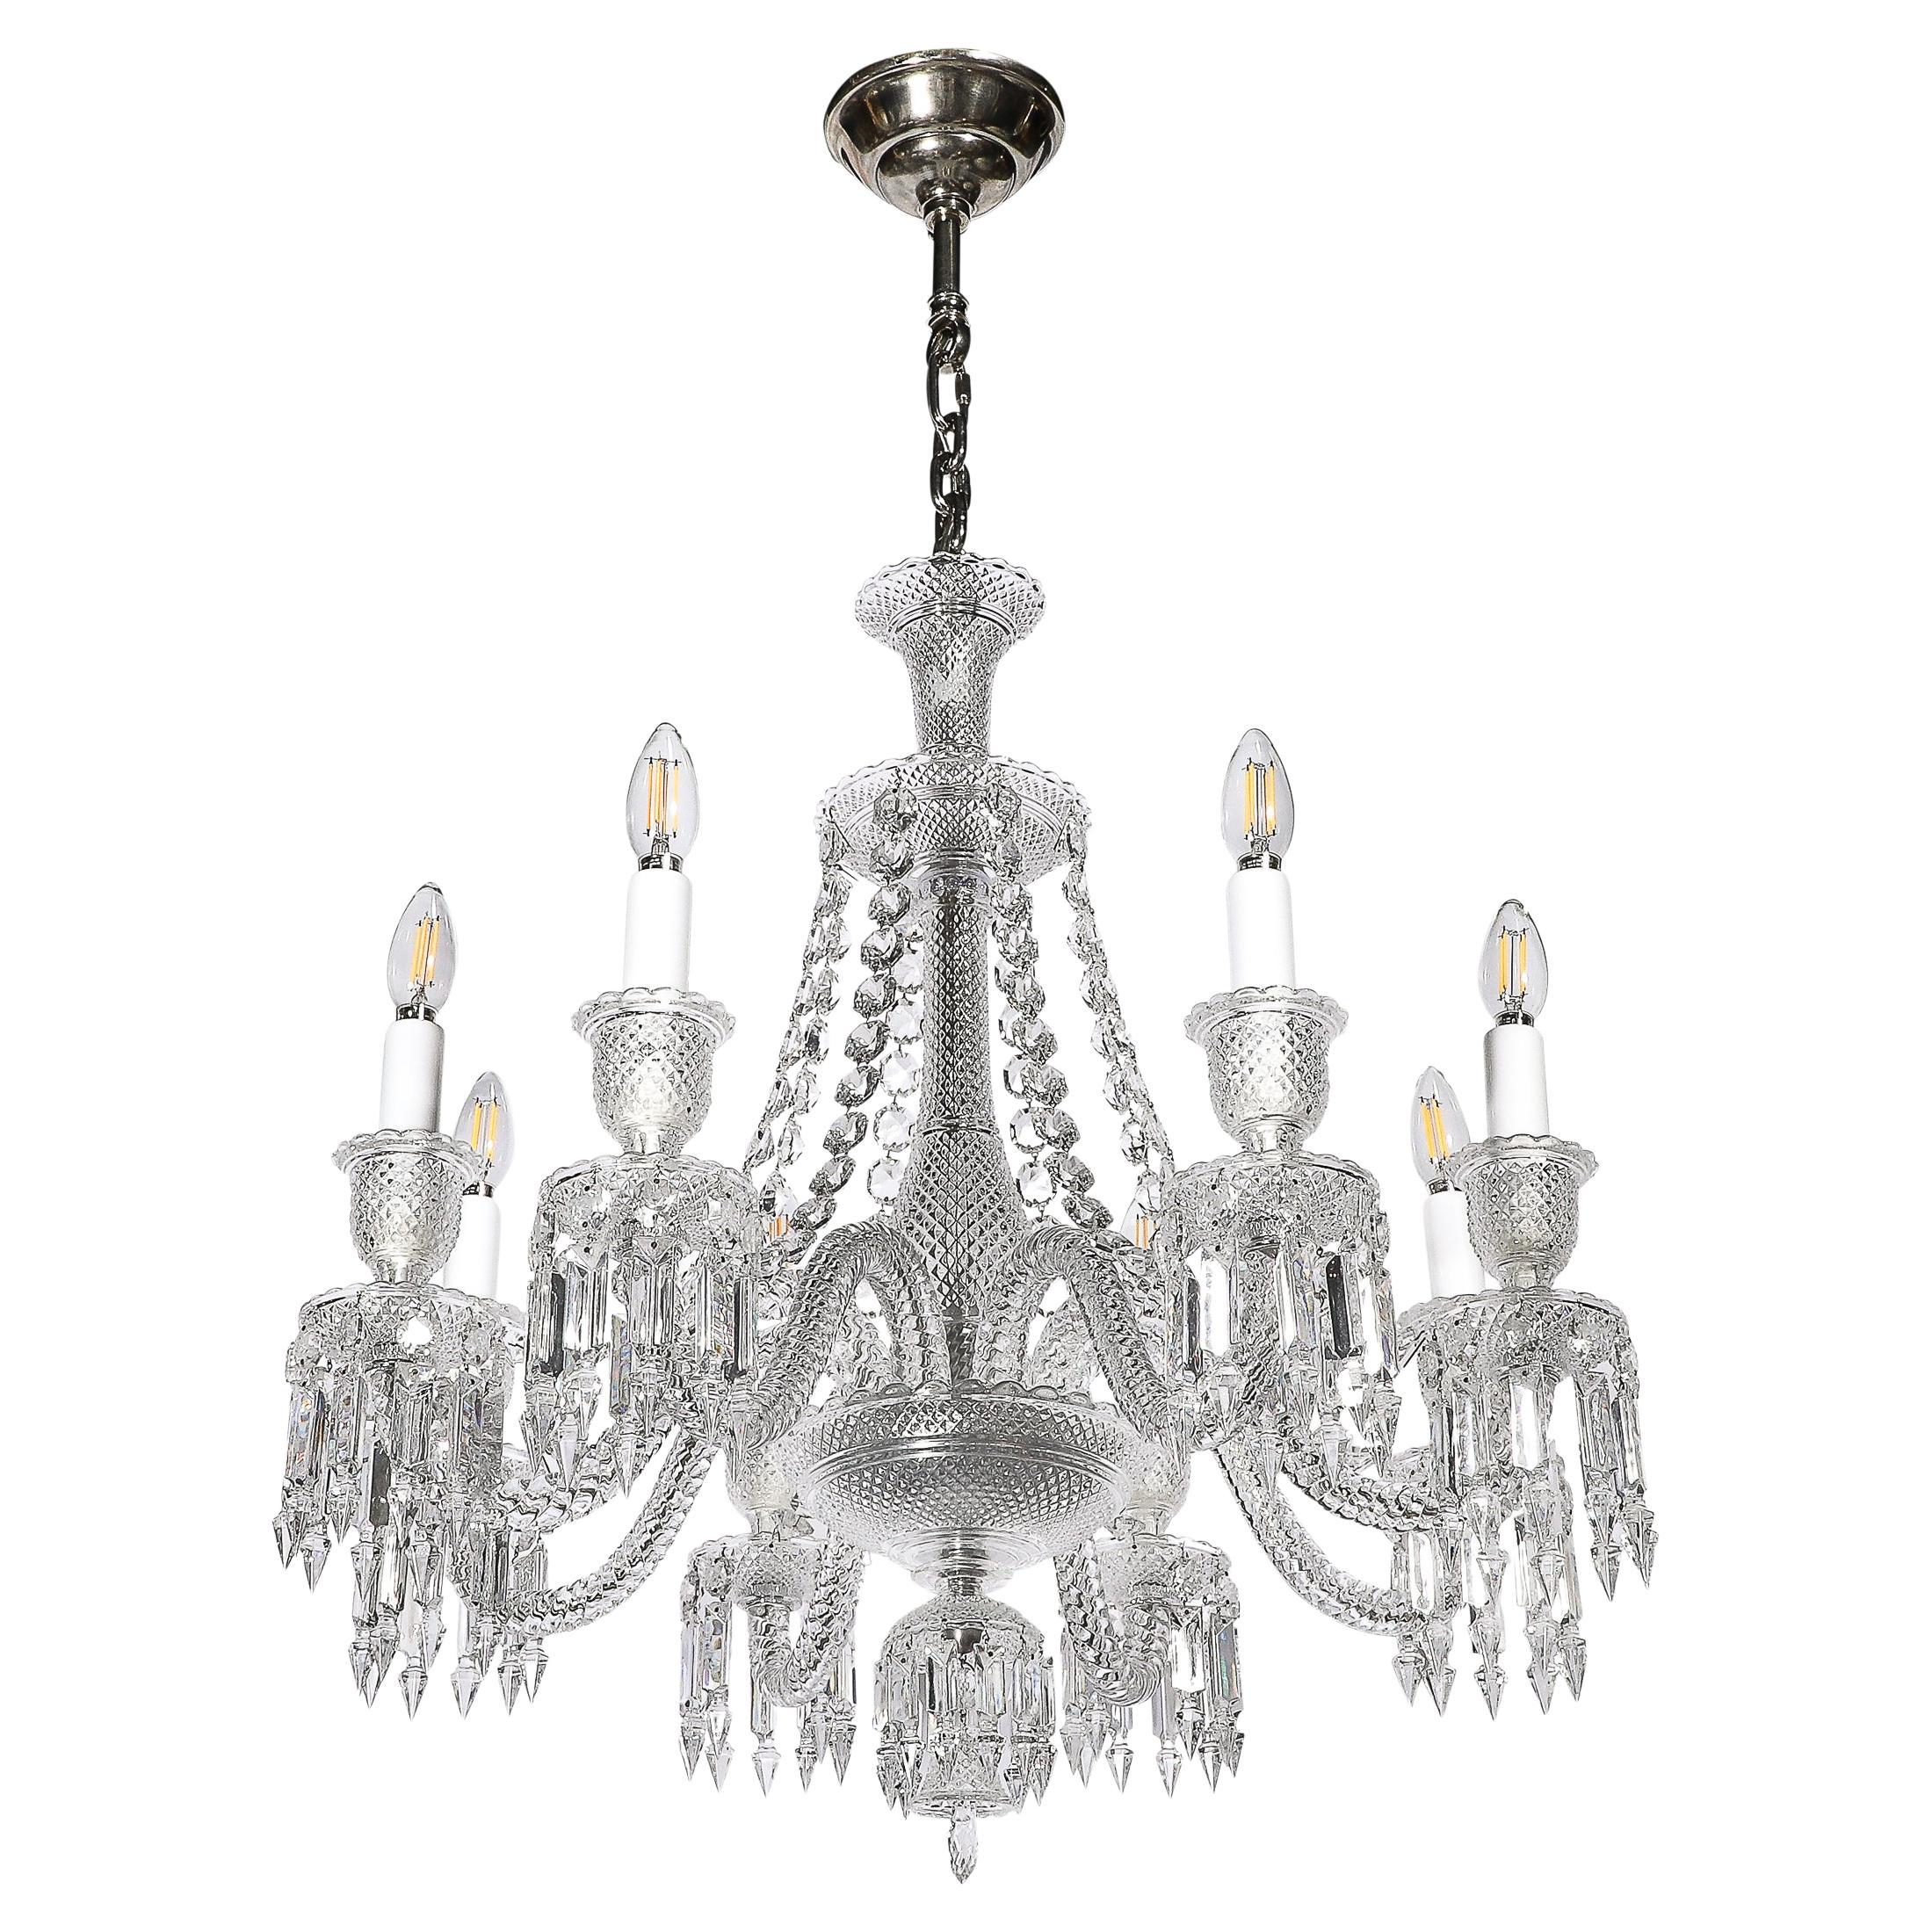 Mid-Century Modernist Eight Light Crystal "Zenith" Chandelier by Baccarat For Sale